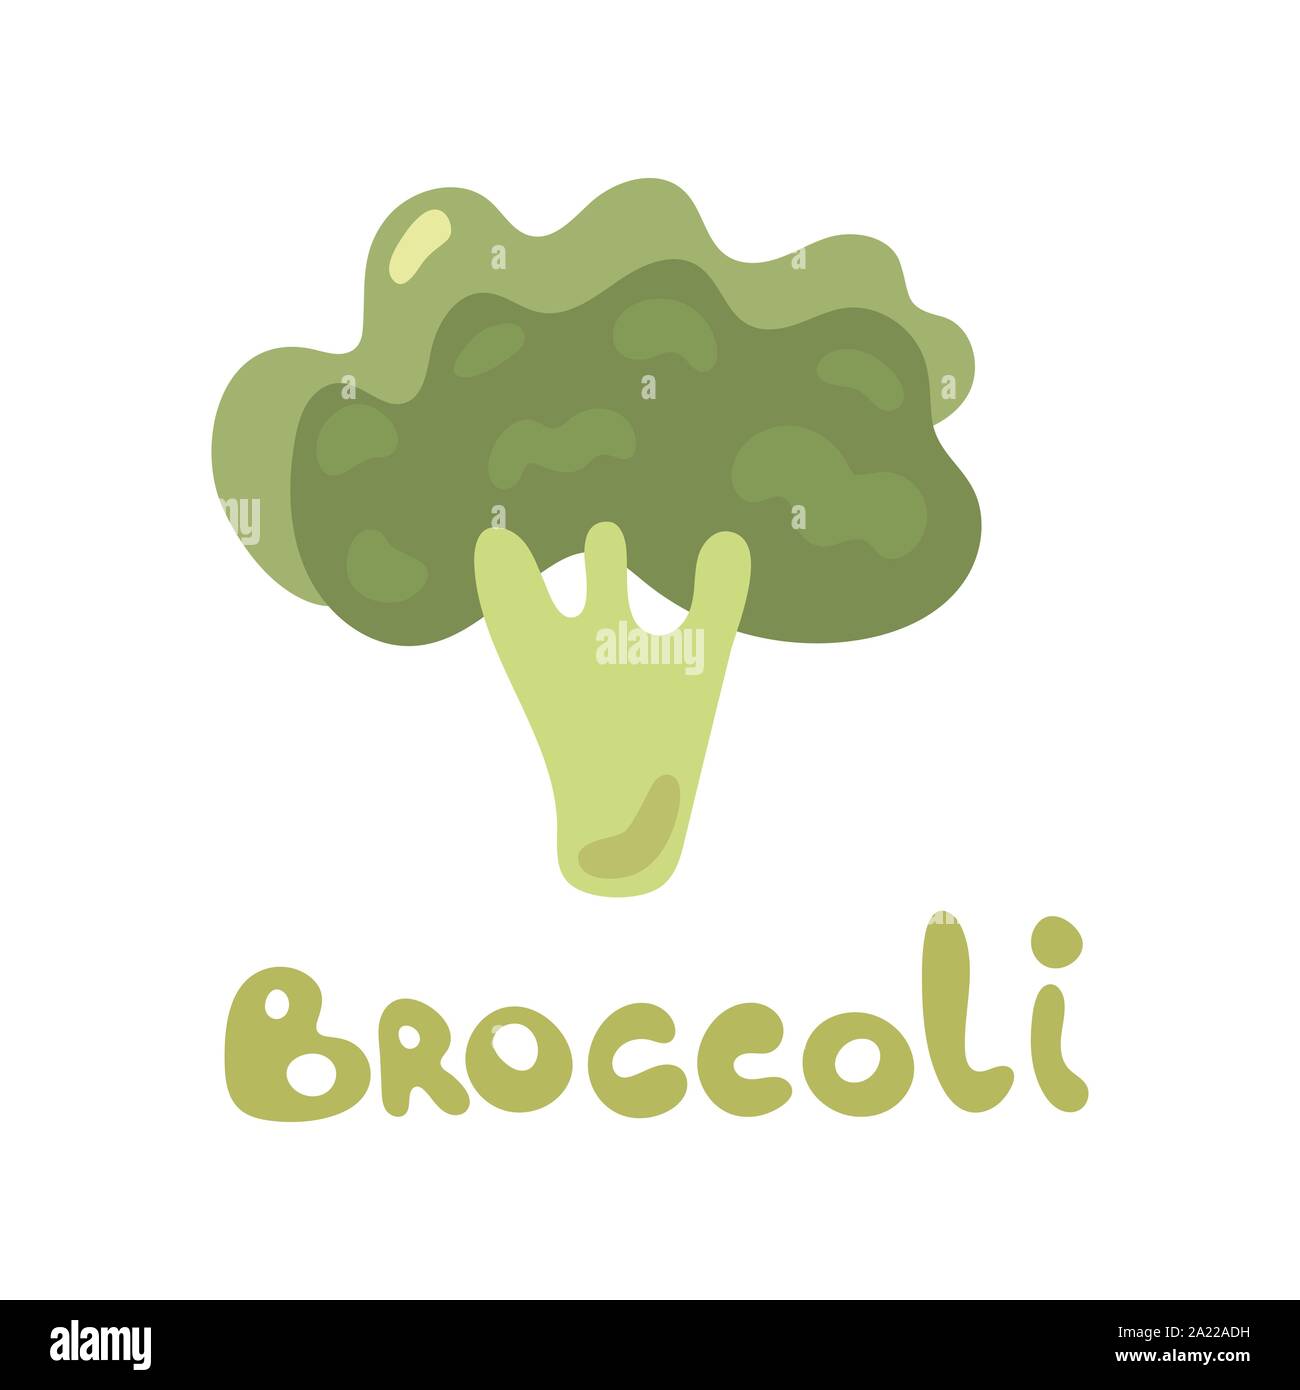 Cute Vector Cartoon Broccoli Illustration. Fresh vegetable isolated on white background used for magazine, book, poster, card, menu cover, web pages. Stock Vector